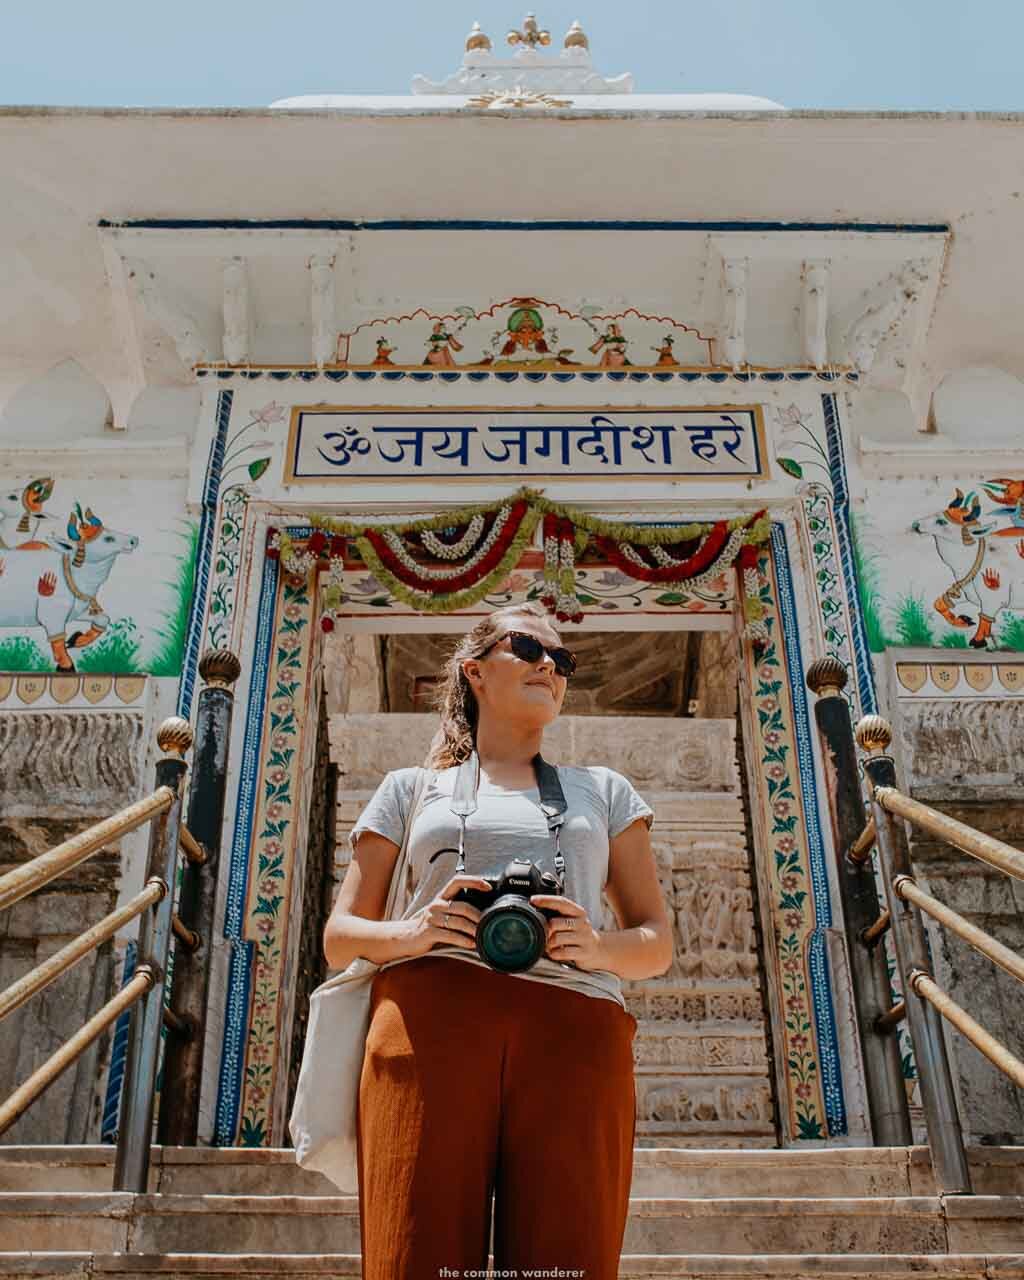 Standing on the steps of Jagdish temple, Udaipur